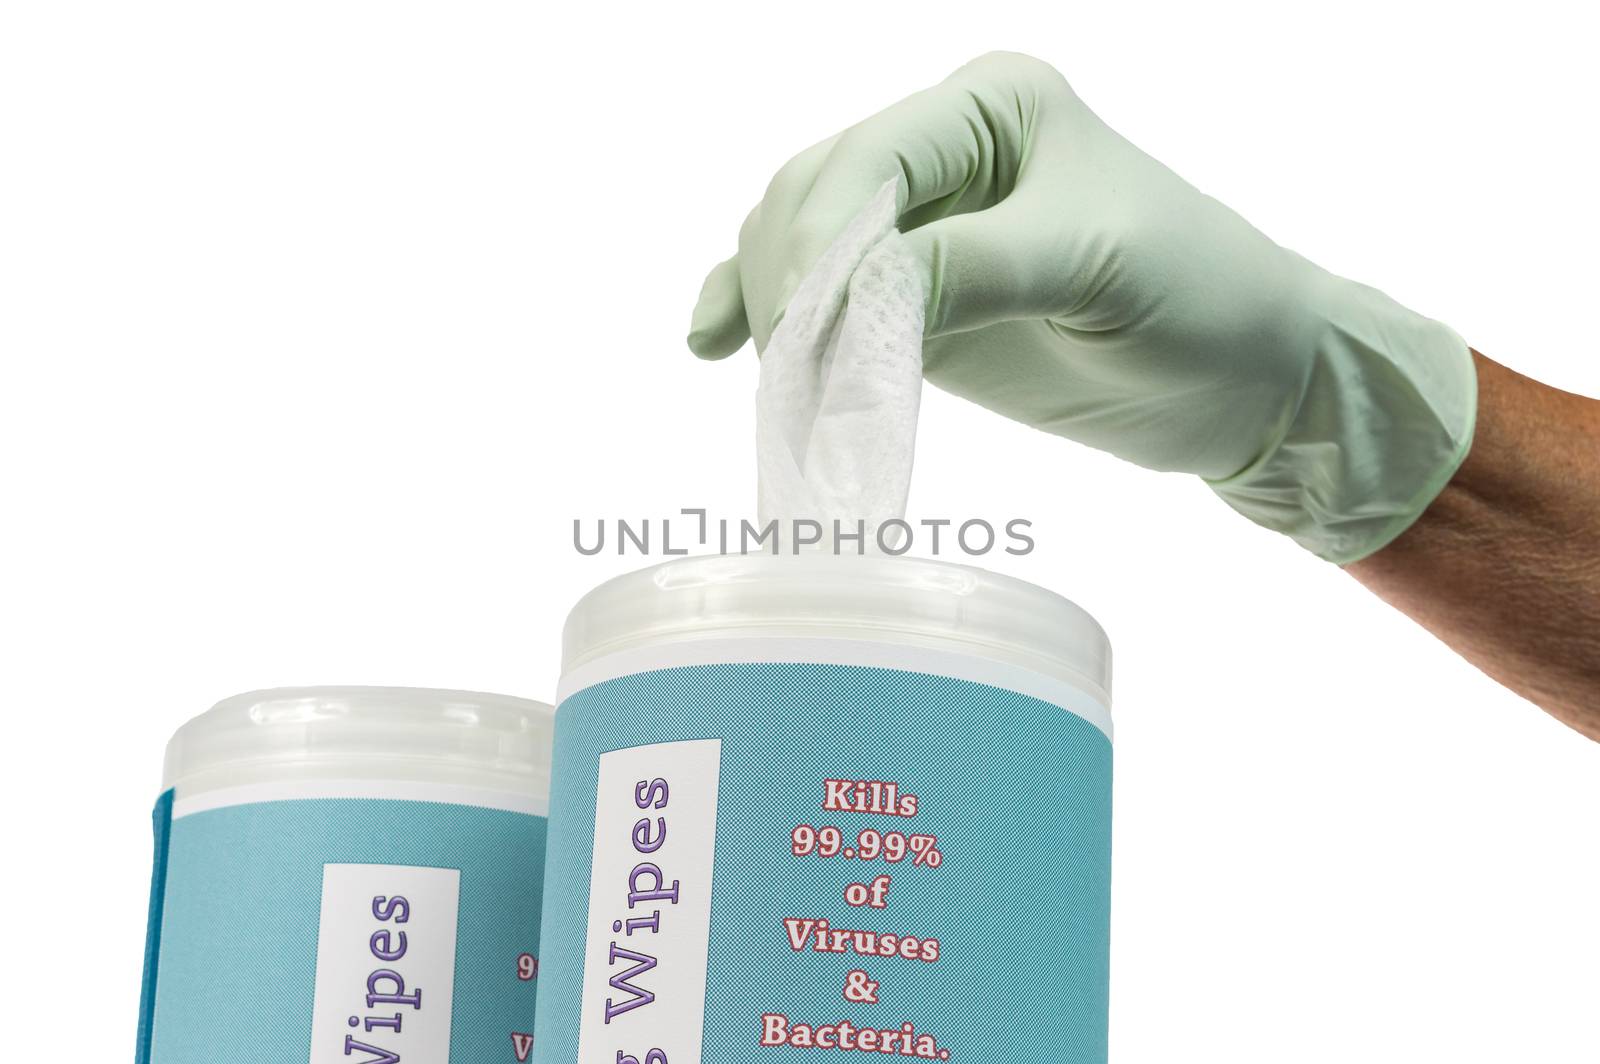 Angled close up photograph of a rubber gloved hand pulling a disinfectant wipe out of container. Isolated on a white background.